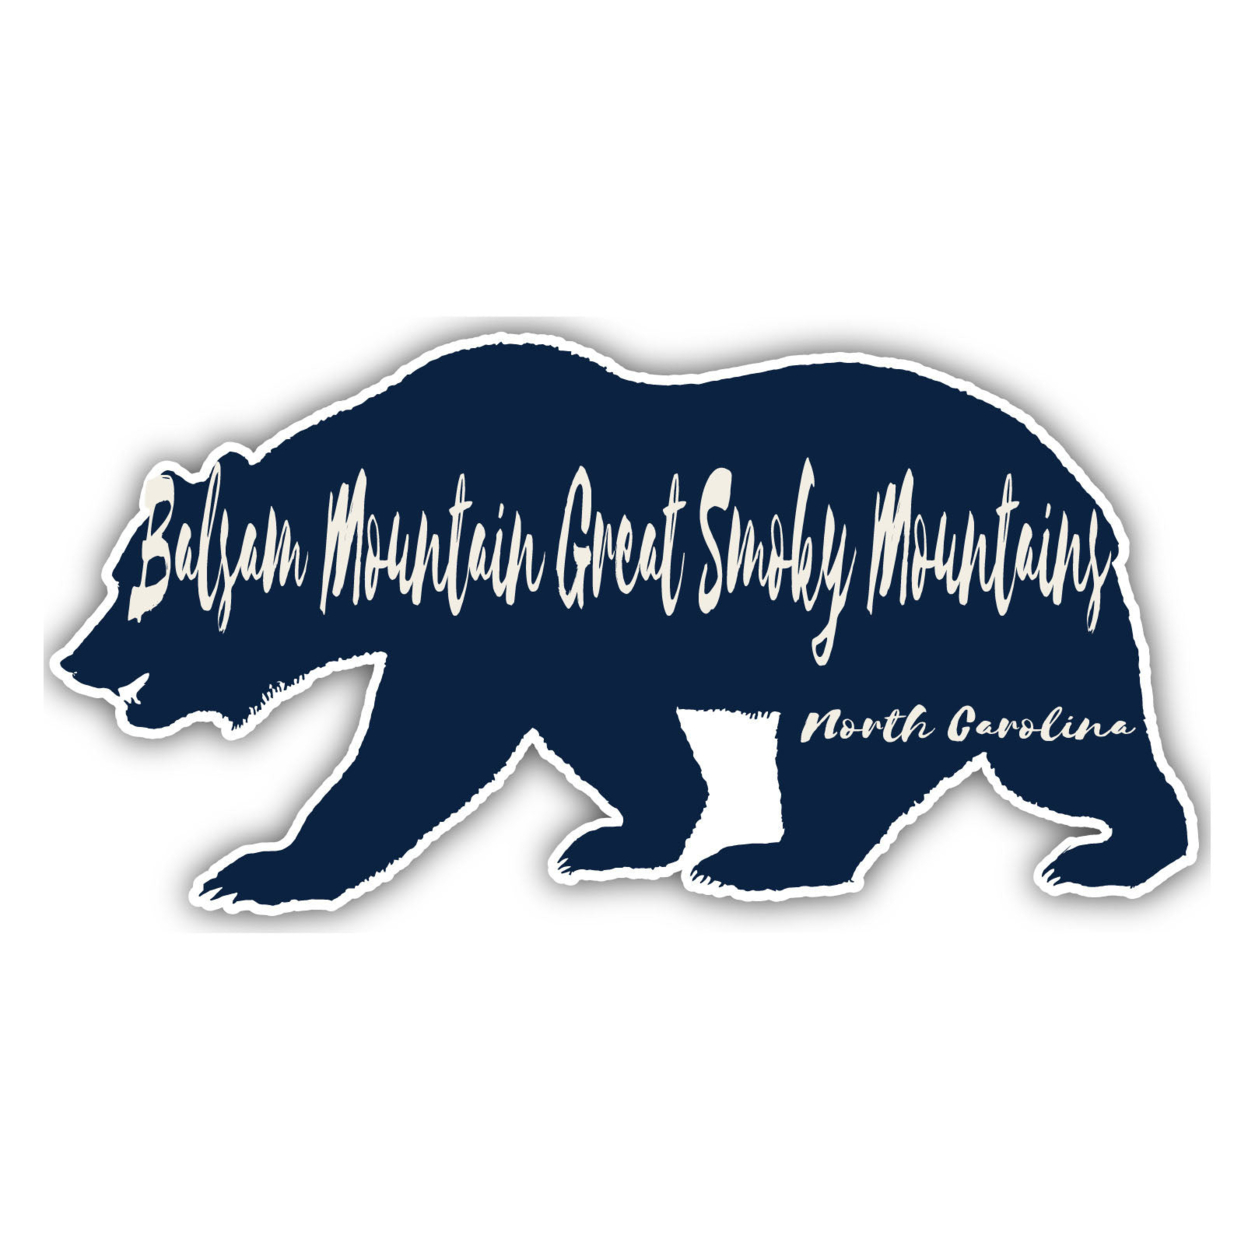 Balsam Mountain Great Smoky Mountains North Carolina Souvenir Decorative Stickers (Choose Theme And Size) - 4-Pack, 4-Inch, Bear